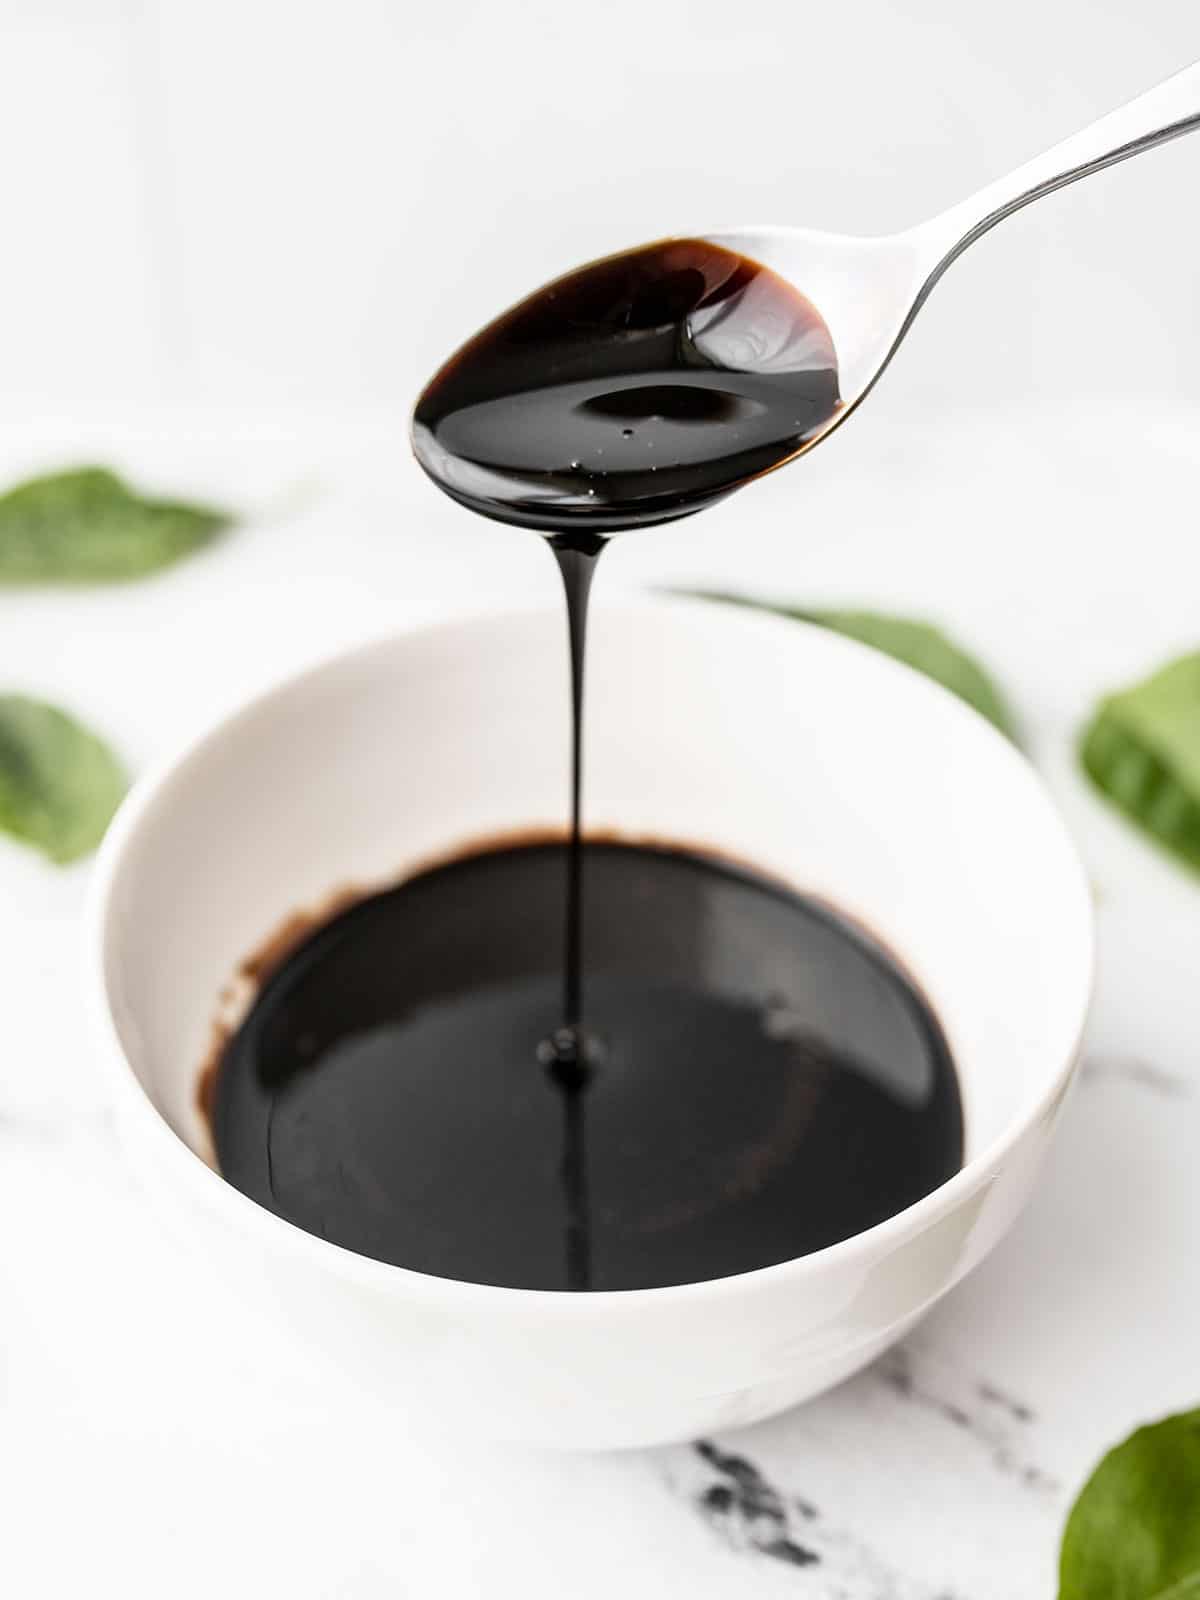 Balsamic glaze dripping off a spoon into a small bowl